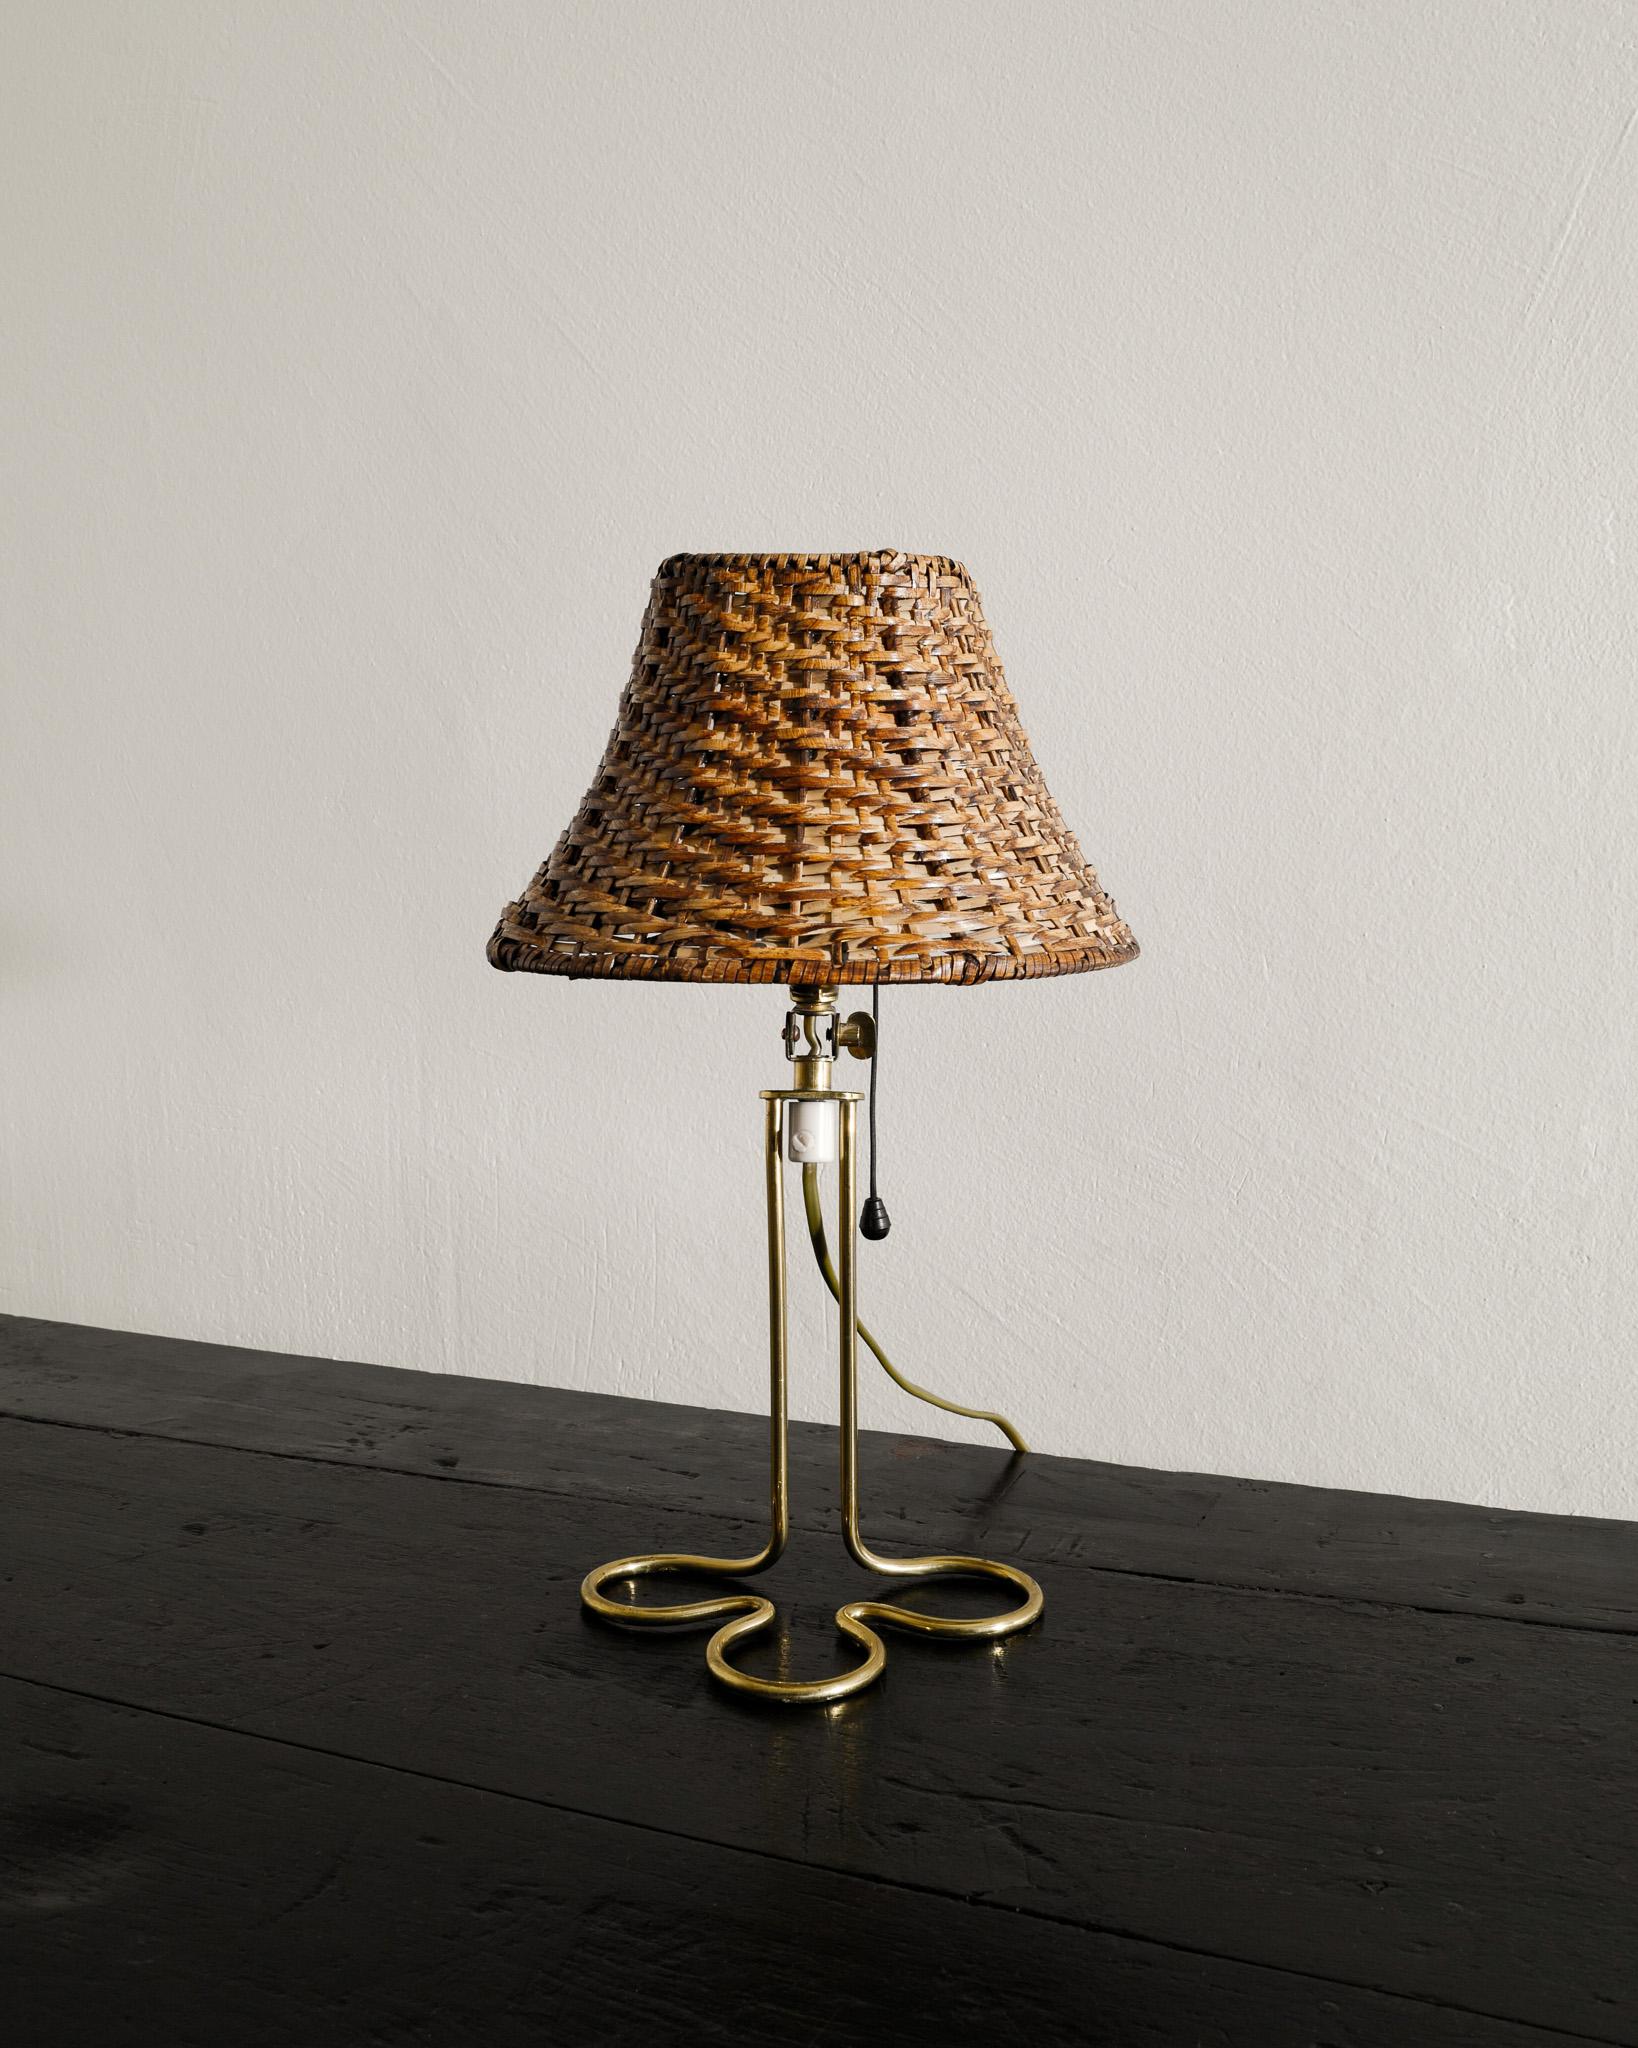 Rare mid century brass desk / table lamp by Mauri Almari produced by Idman Finland, 1950s. In good original condition with a later rattan shade that is also in great condition. 

Dimensions: H: 36 cm / 14.15